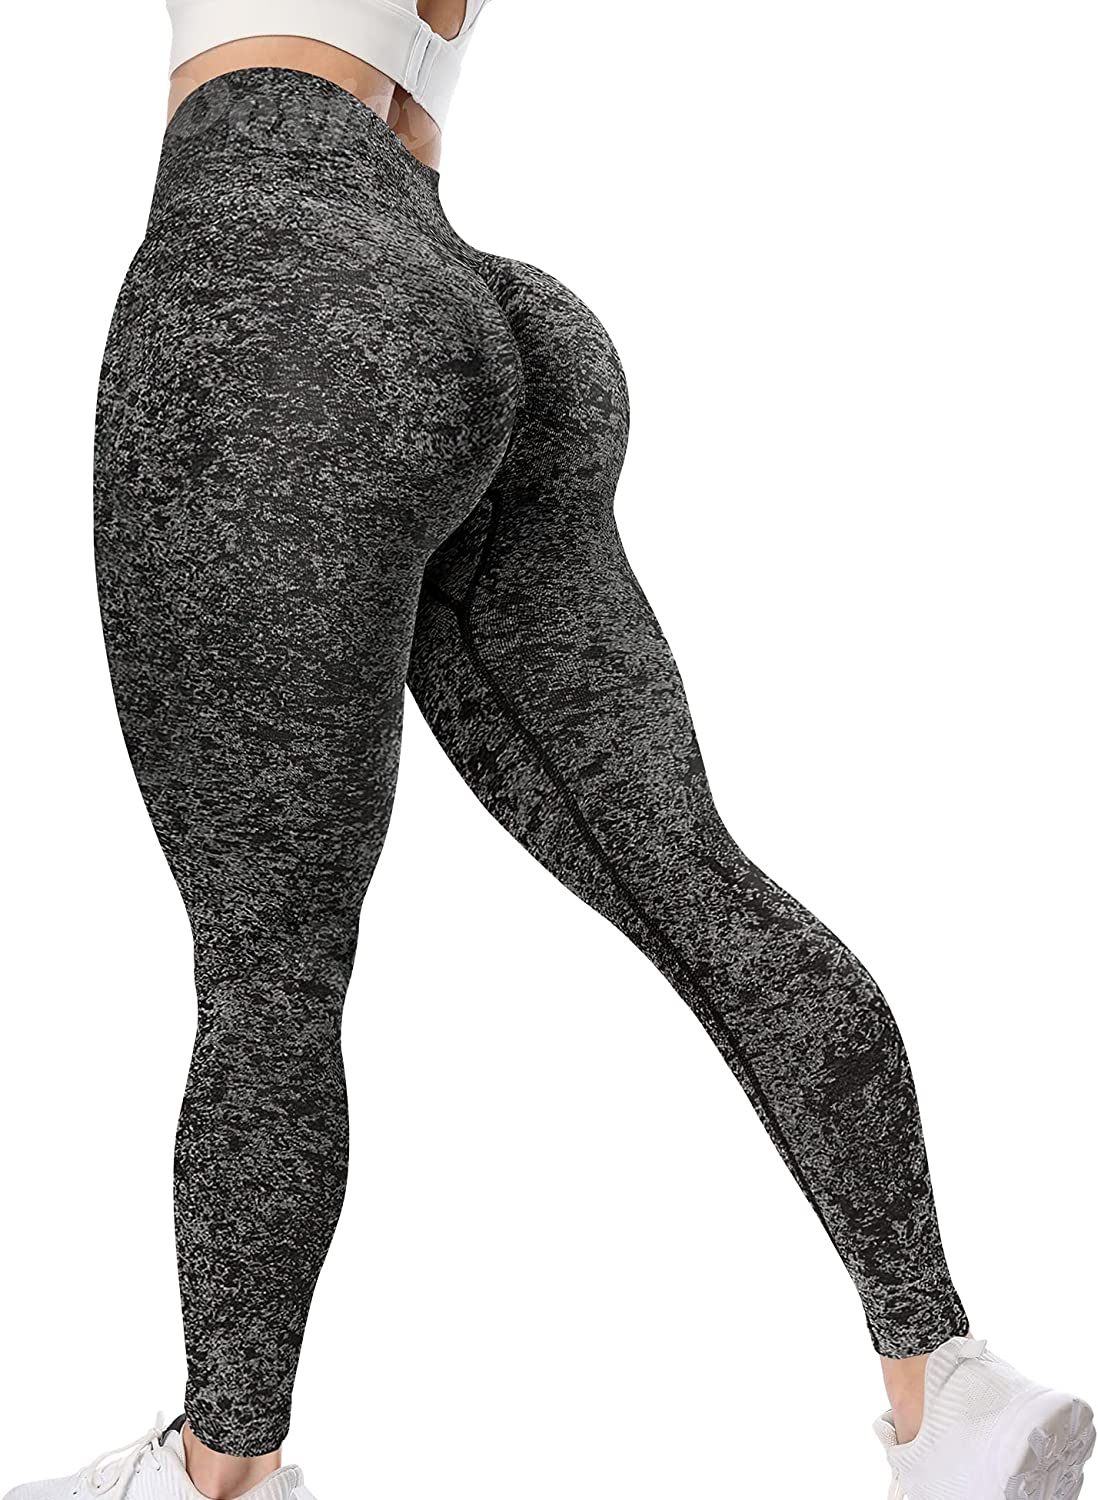 A little update on the Voyjoy leggings. I previously reviewed these on